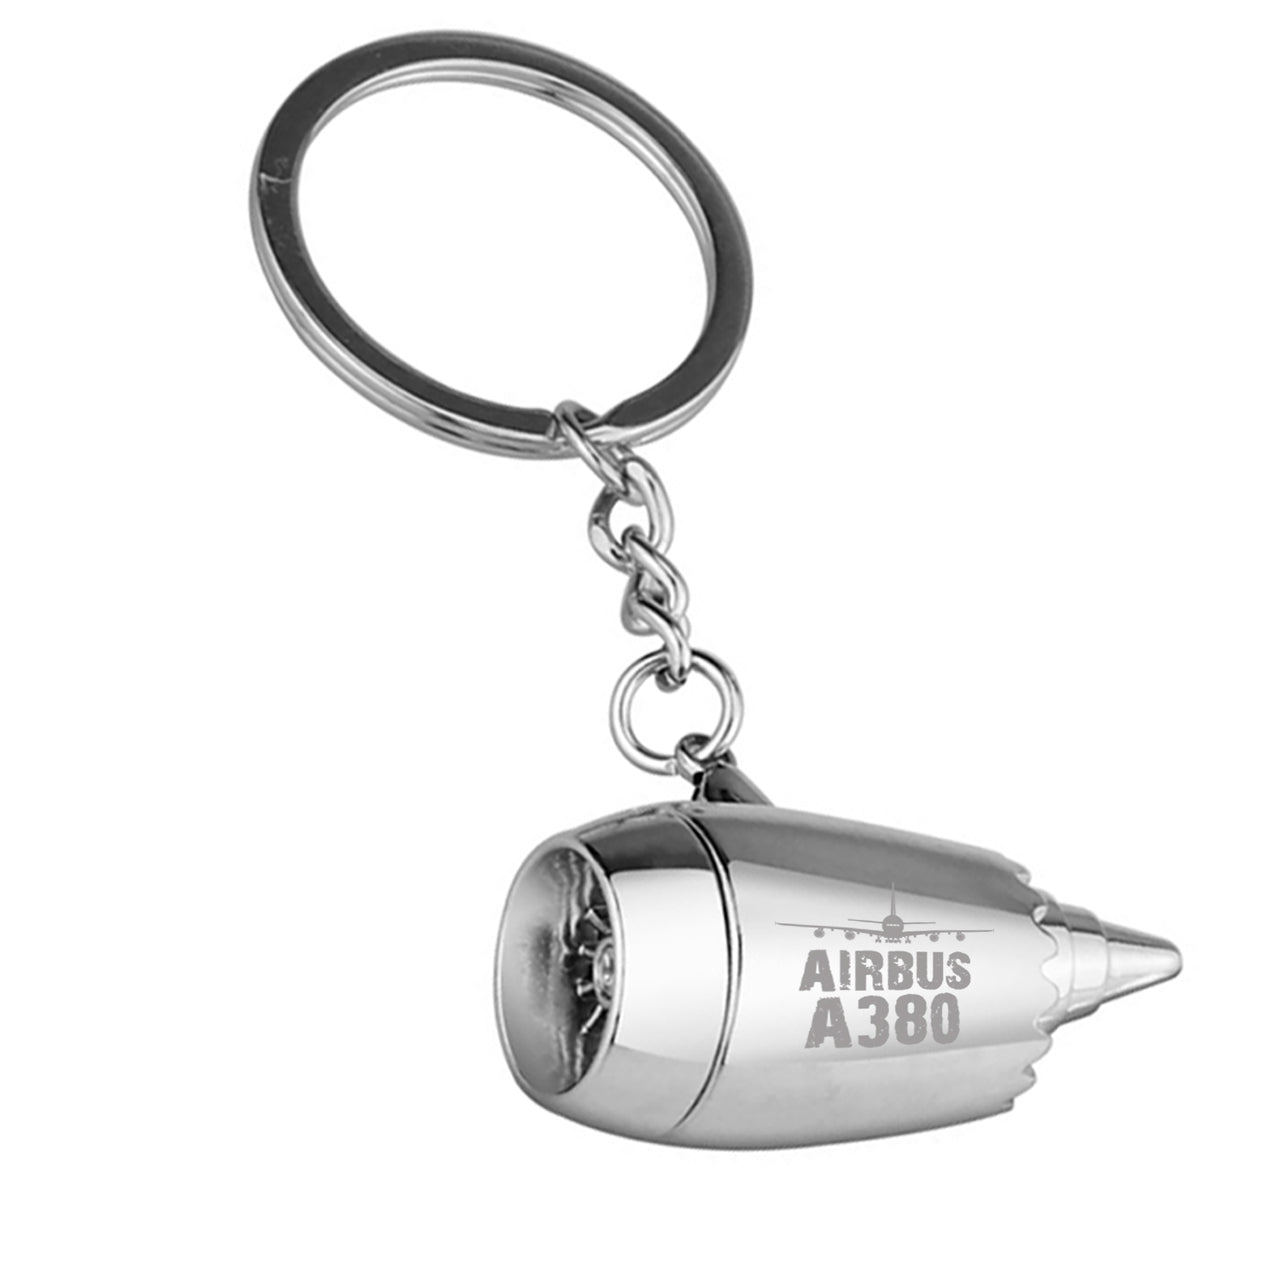 Airbus A380 & Plane Designed Airplane Jet Engine Shaped Key Chain